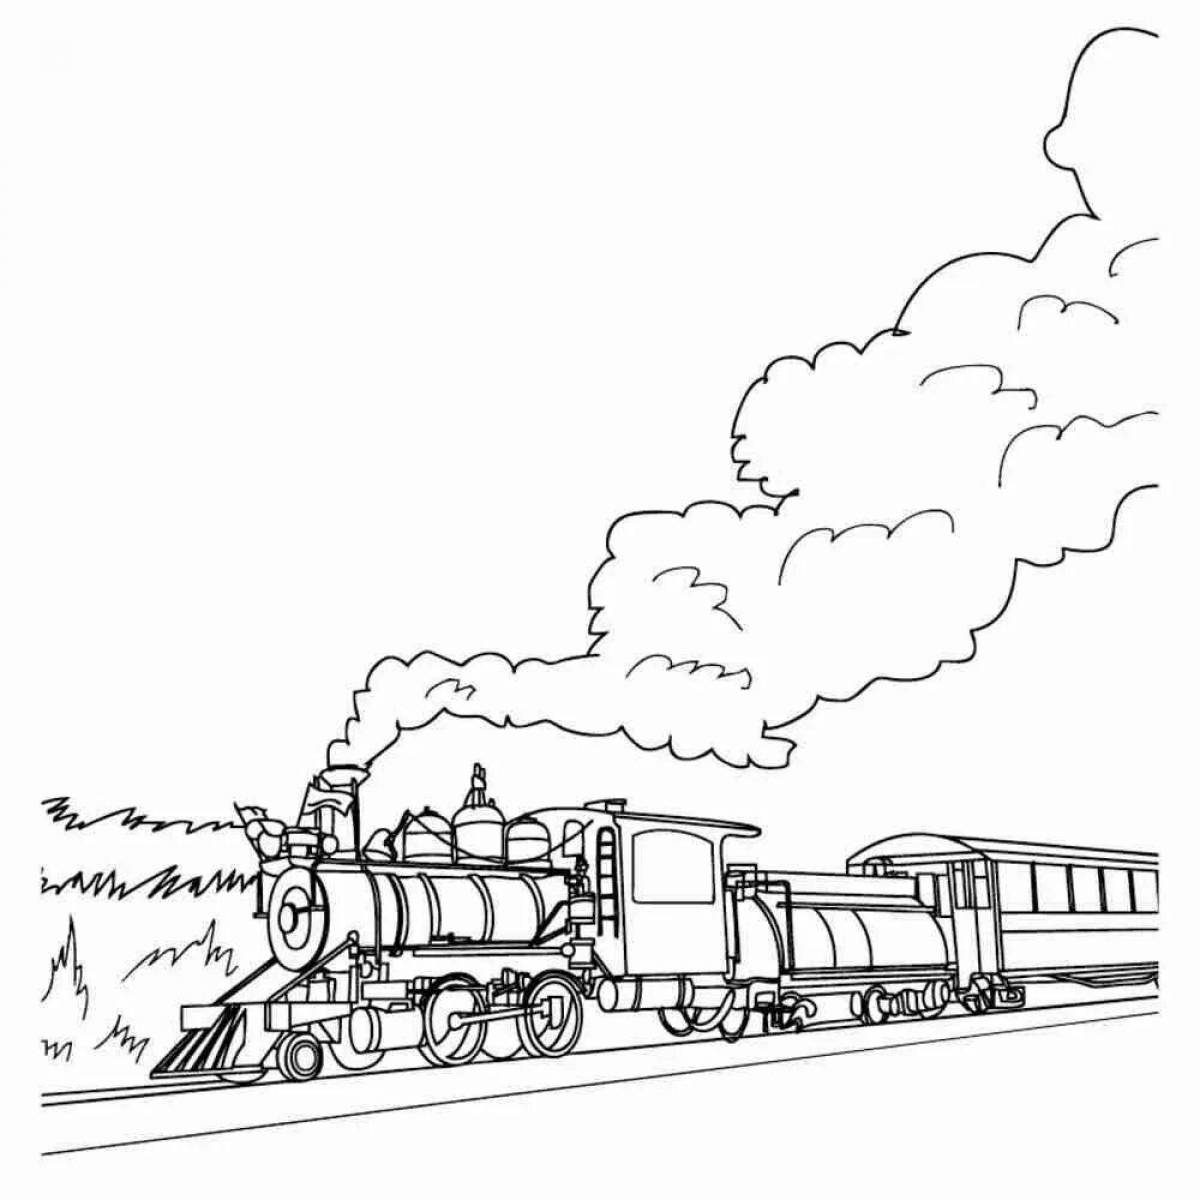 Coloring book dazzling freight train for kids